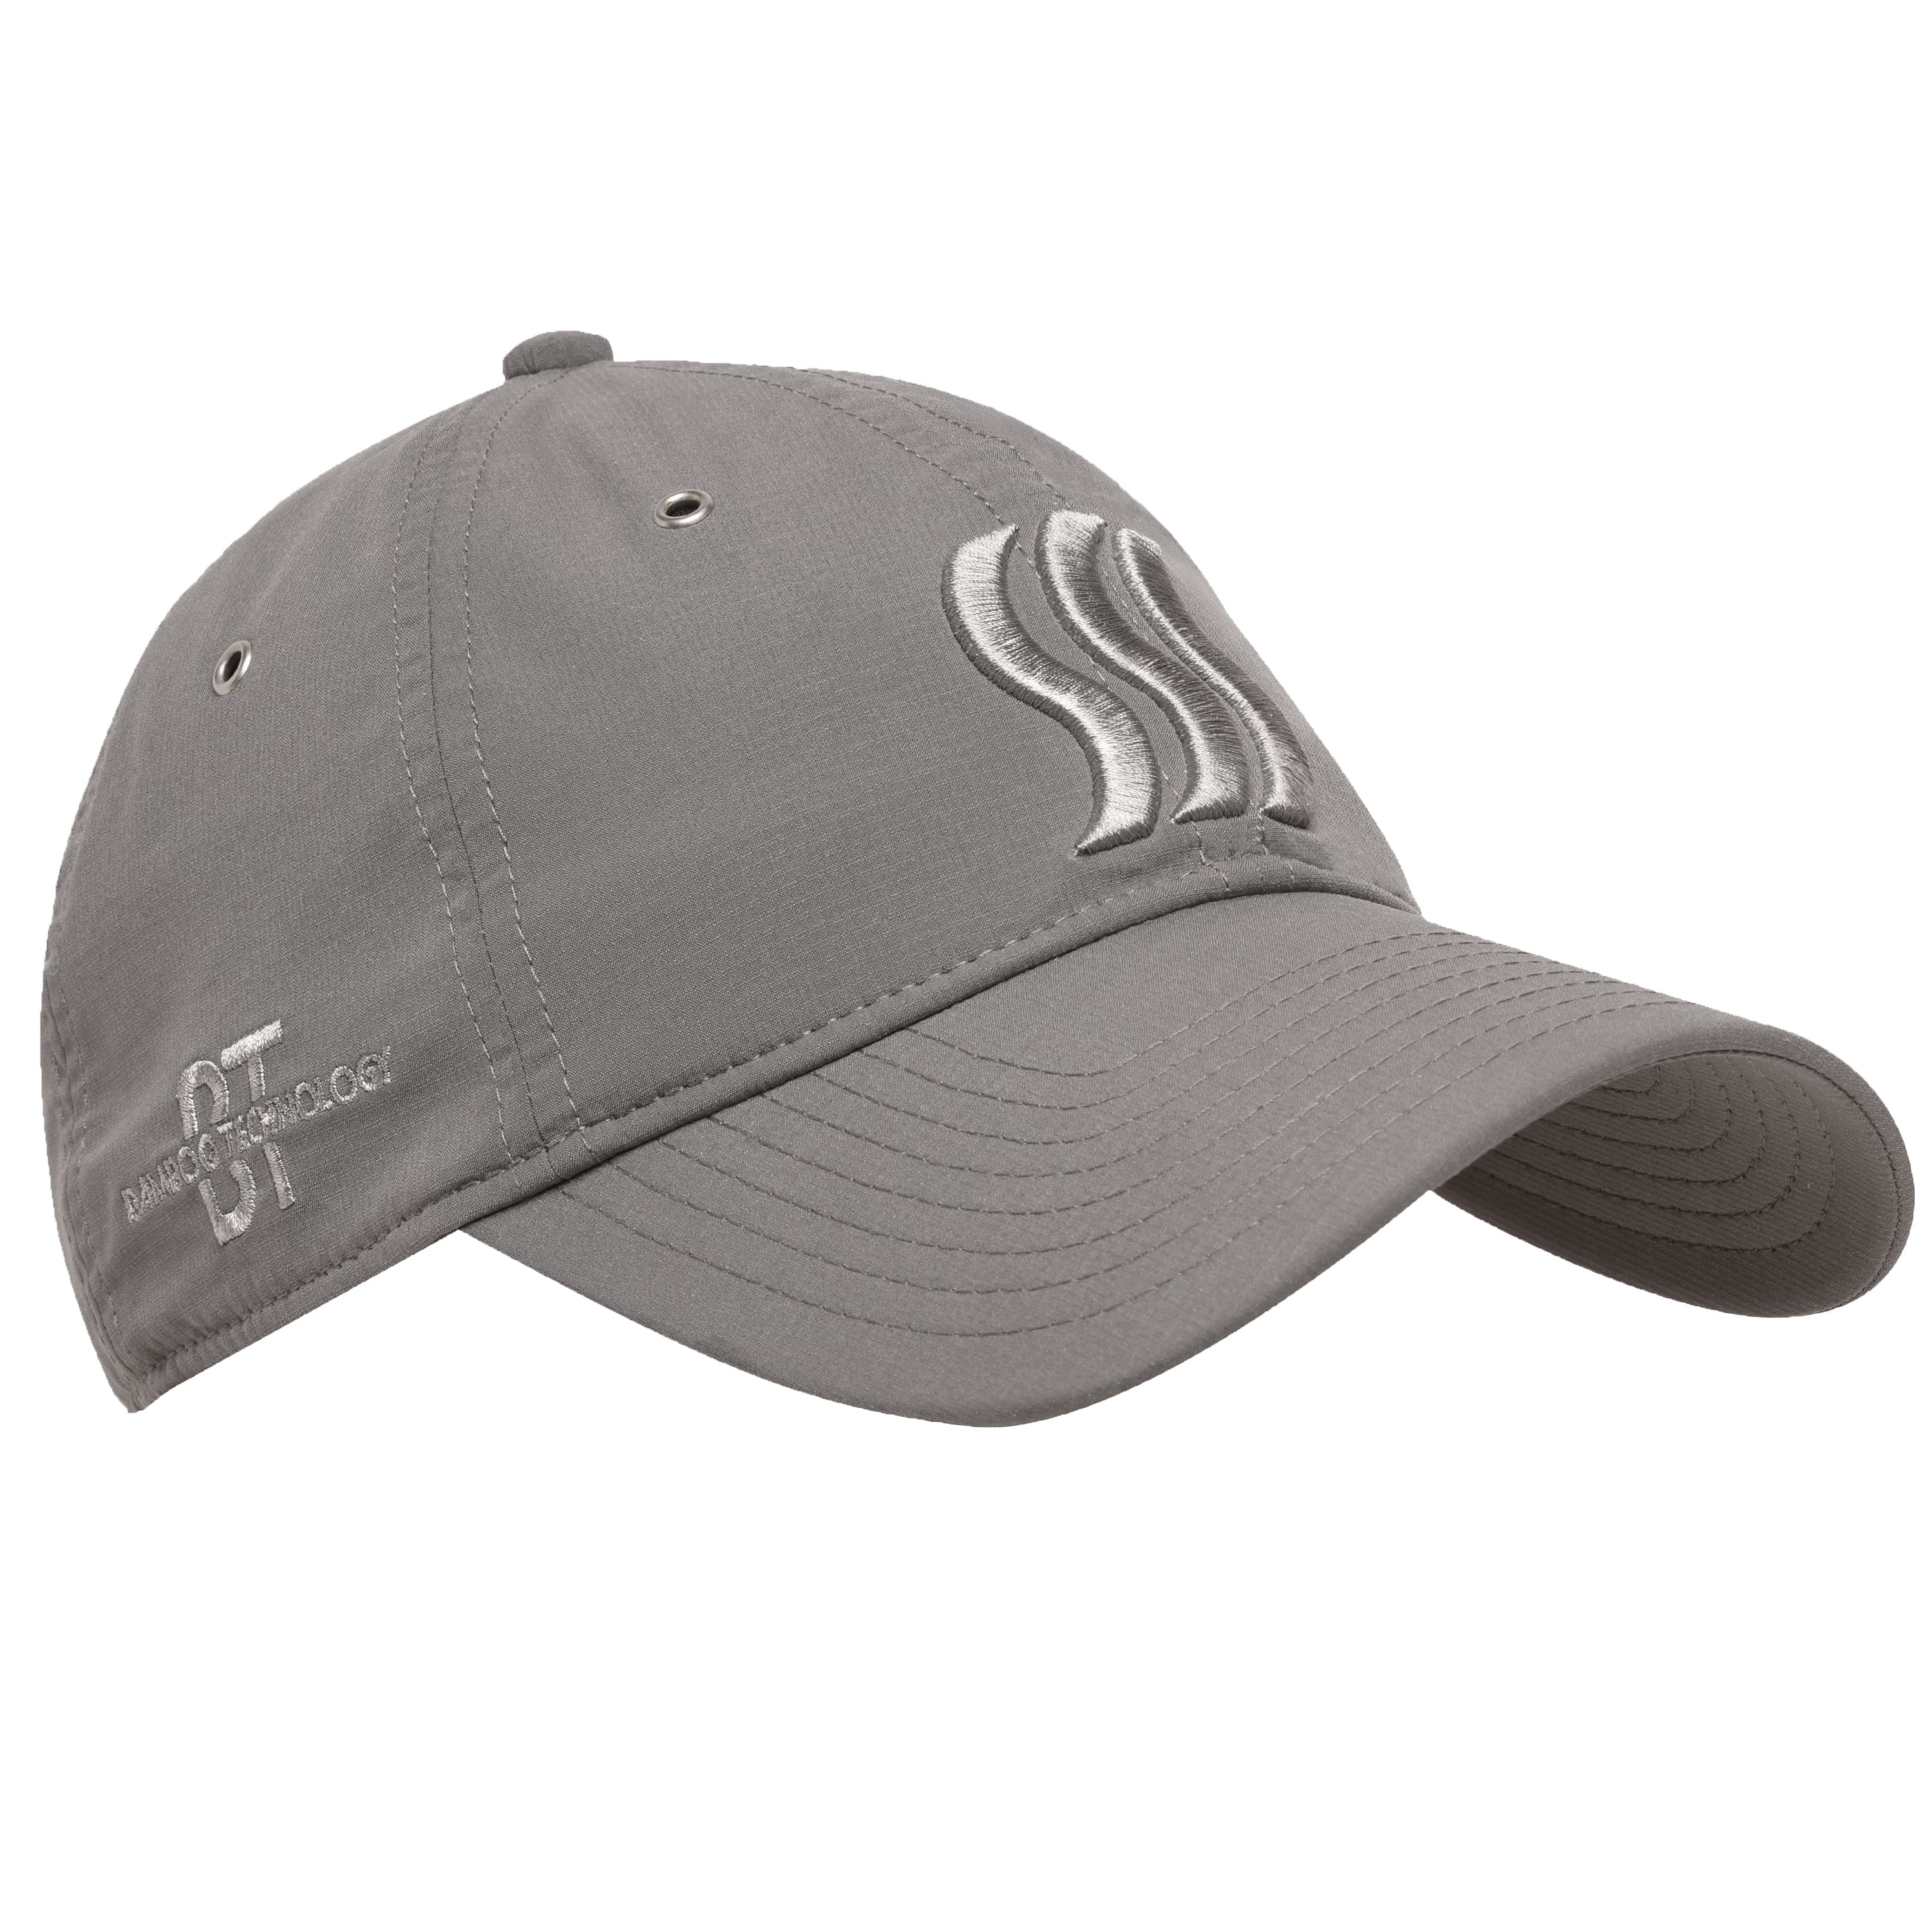 Max Dry Hats for Men and Women